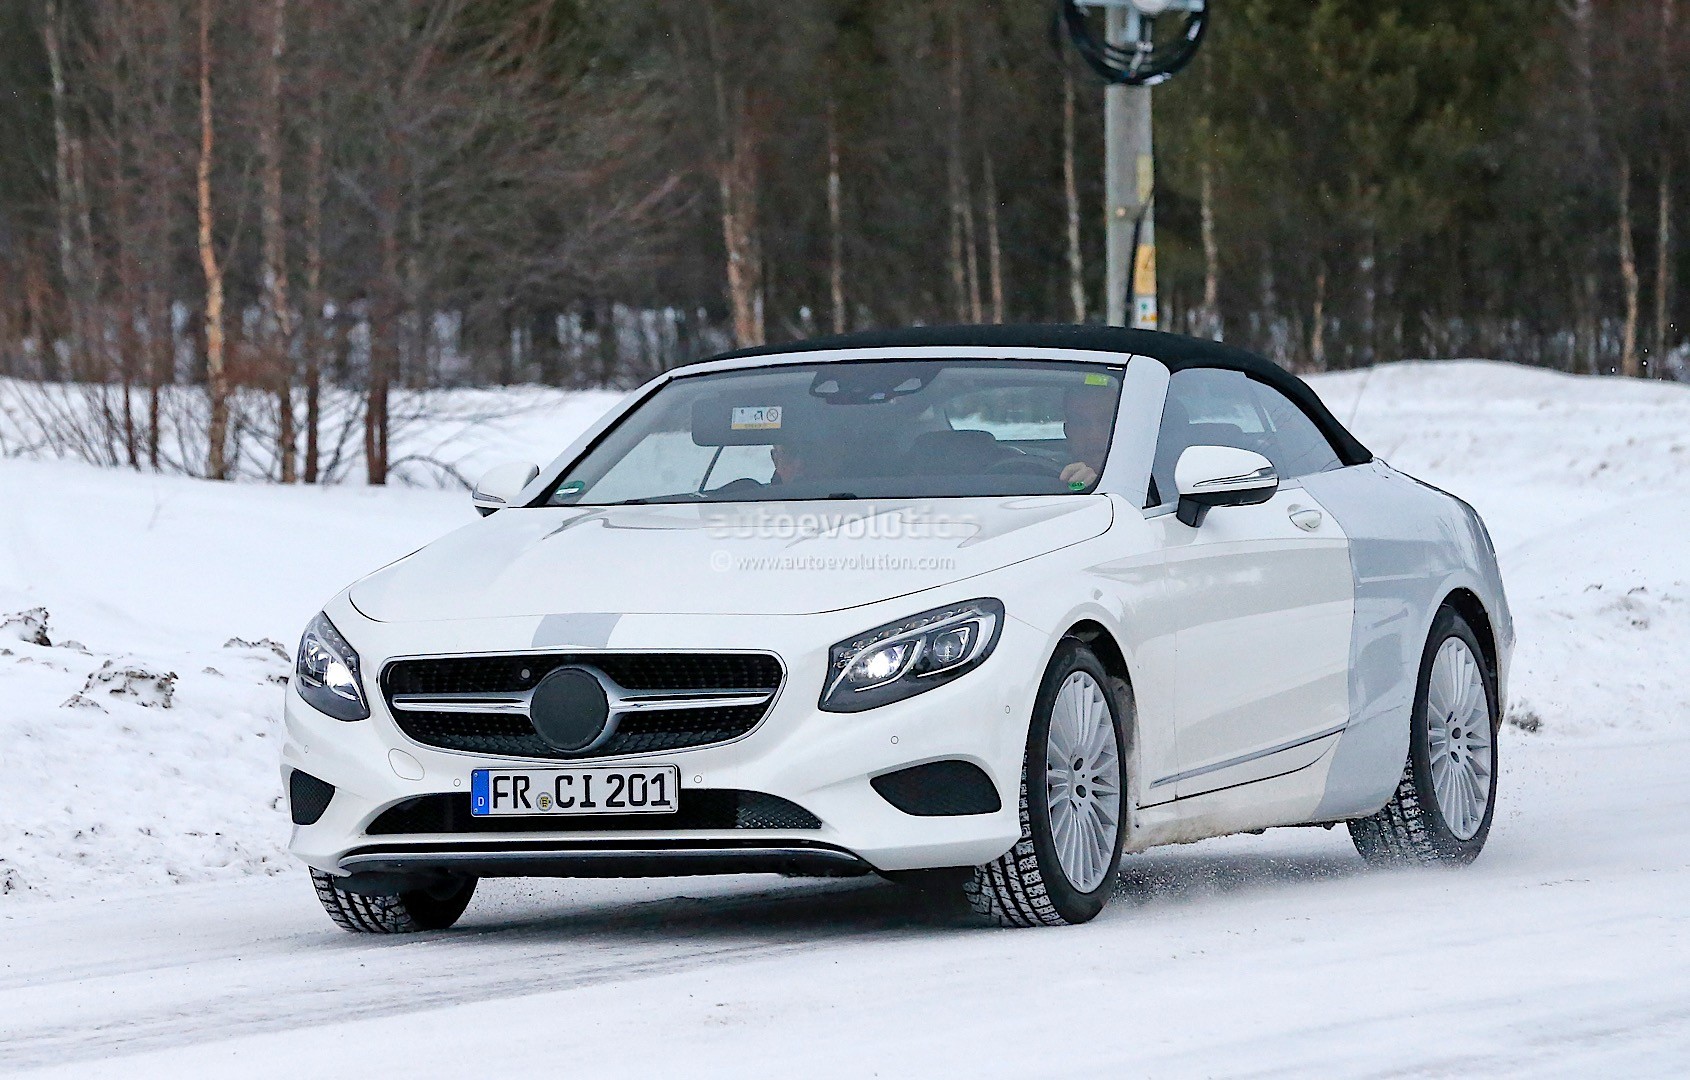 spyshots-mercedes-benz-s-class-cabriolet-a217-spotted-cold-weather-testing_1